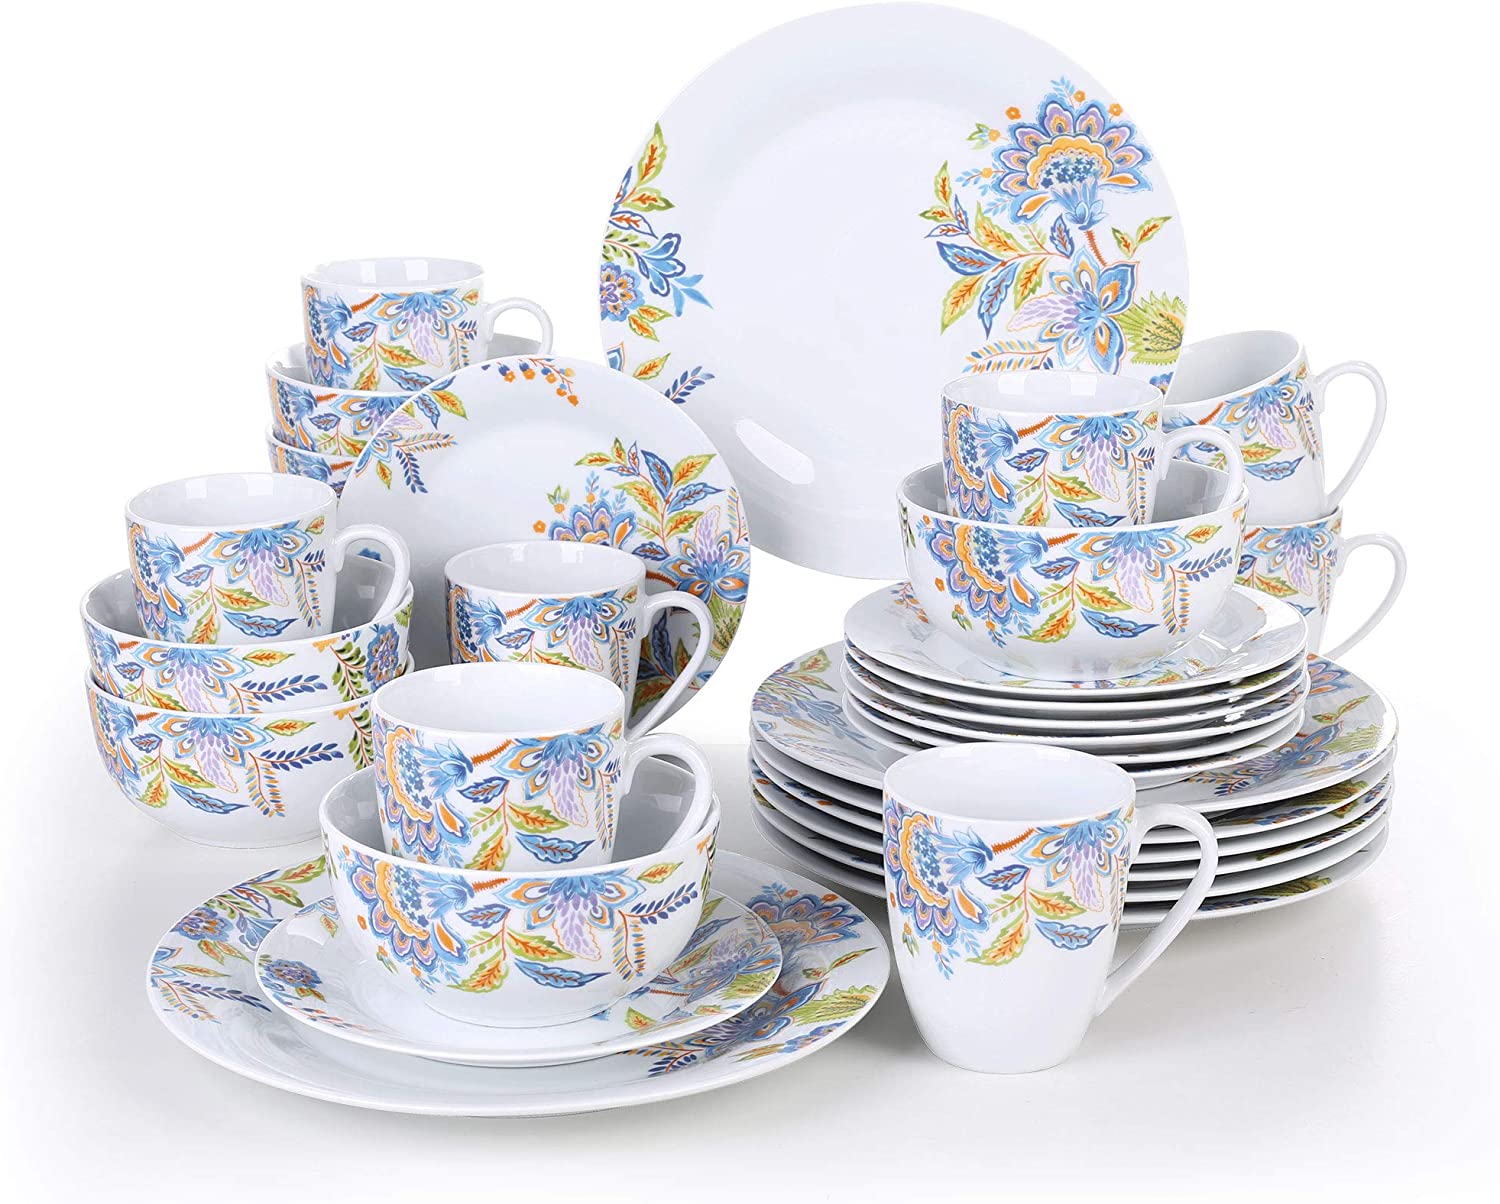 Veweet 32-piece Porcelain Dinner Set, 16-piece Crockery Set includes 10.75 inch (27 cm) Dinner Plate, 7.5 inch (19 cm) Dessert Plate, 5.5 inch (14 cm) Bowl and 380 ml Coffee Mug, Complete Service for 4/8 People